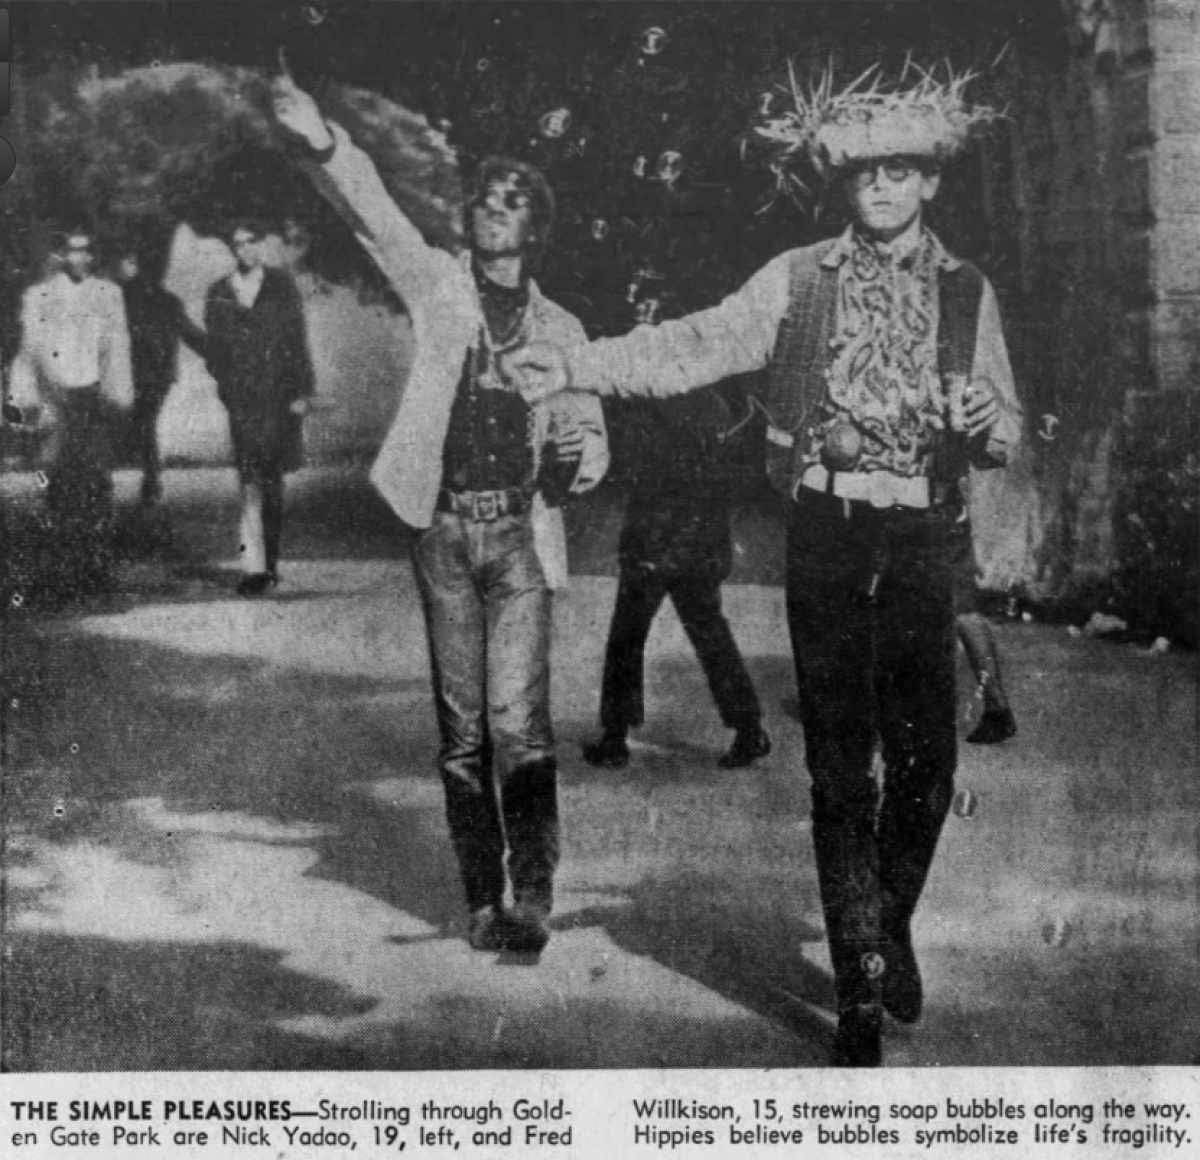 A clipping from a newspaper shows two men in sunglasses and necklaces walking on a sidewalk, waving bubble wands.